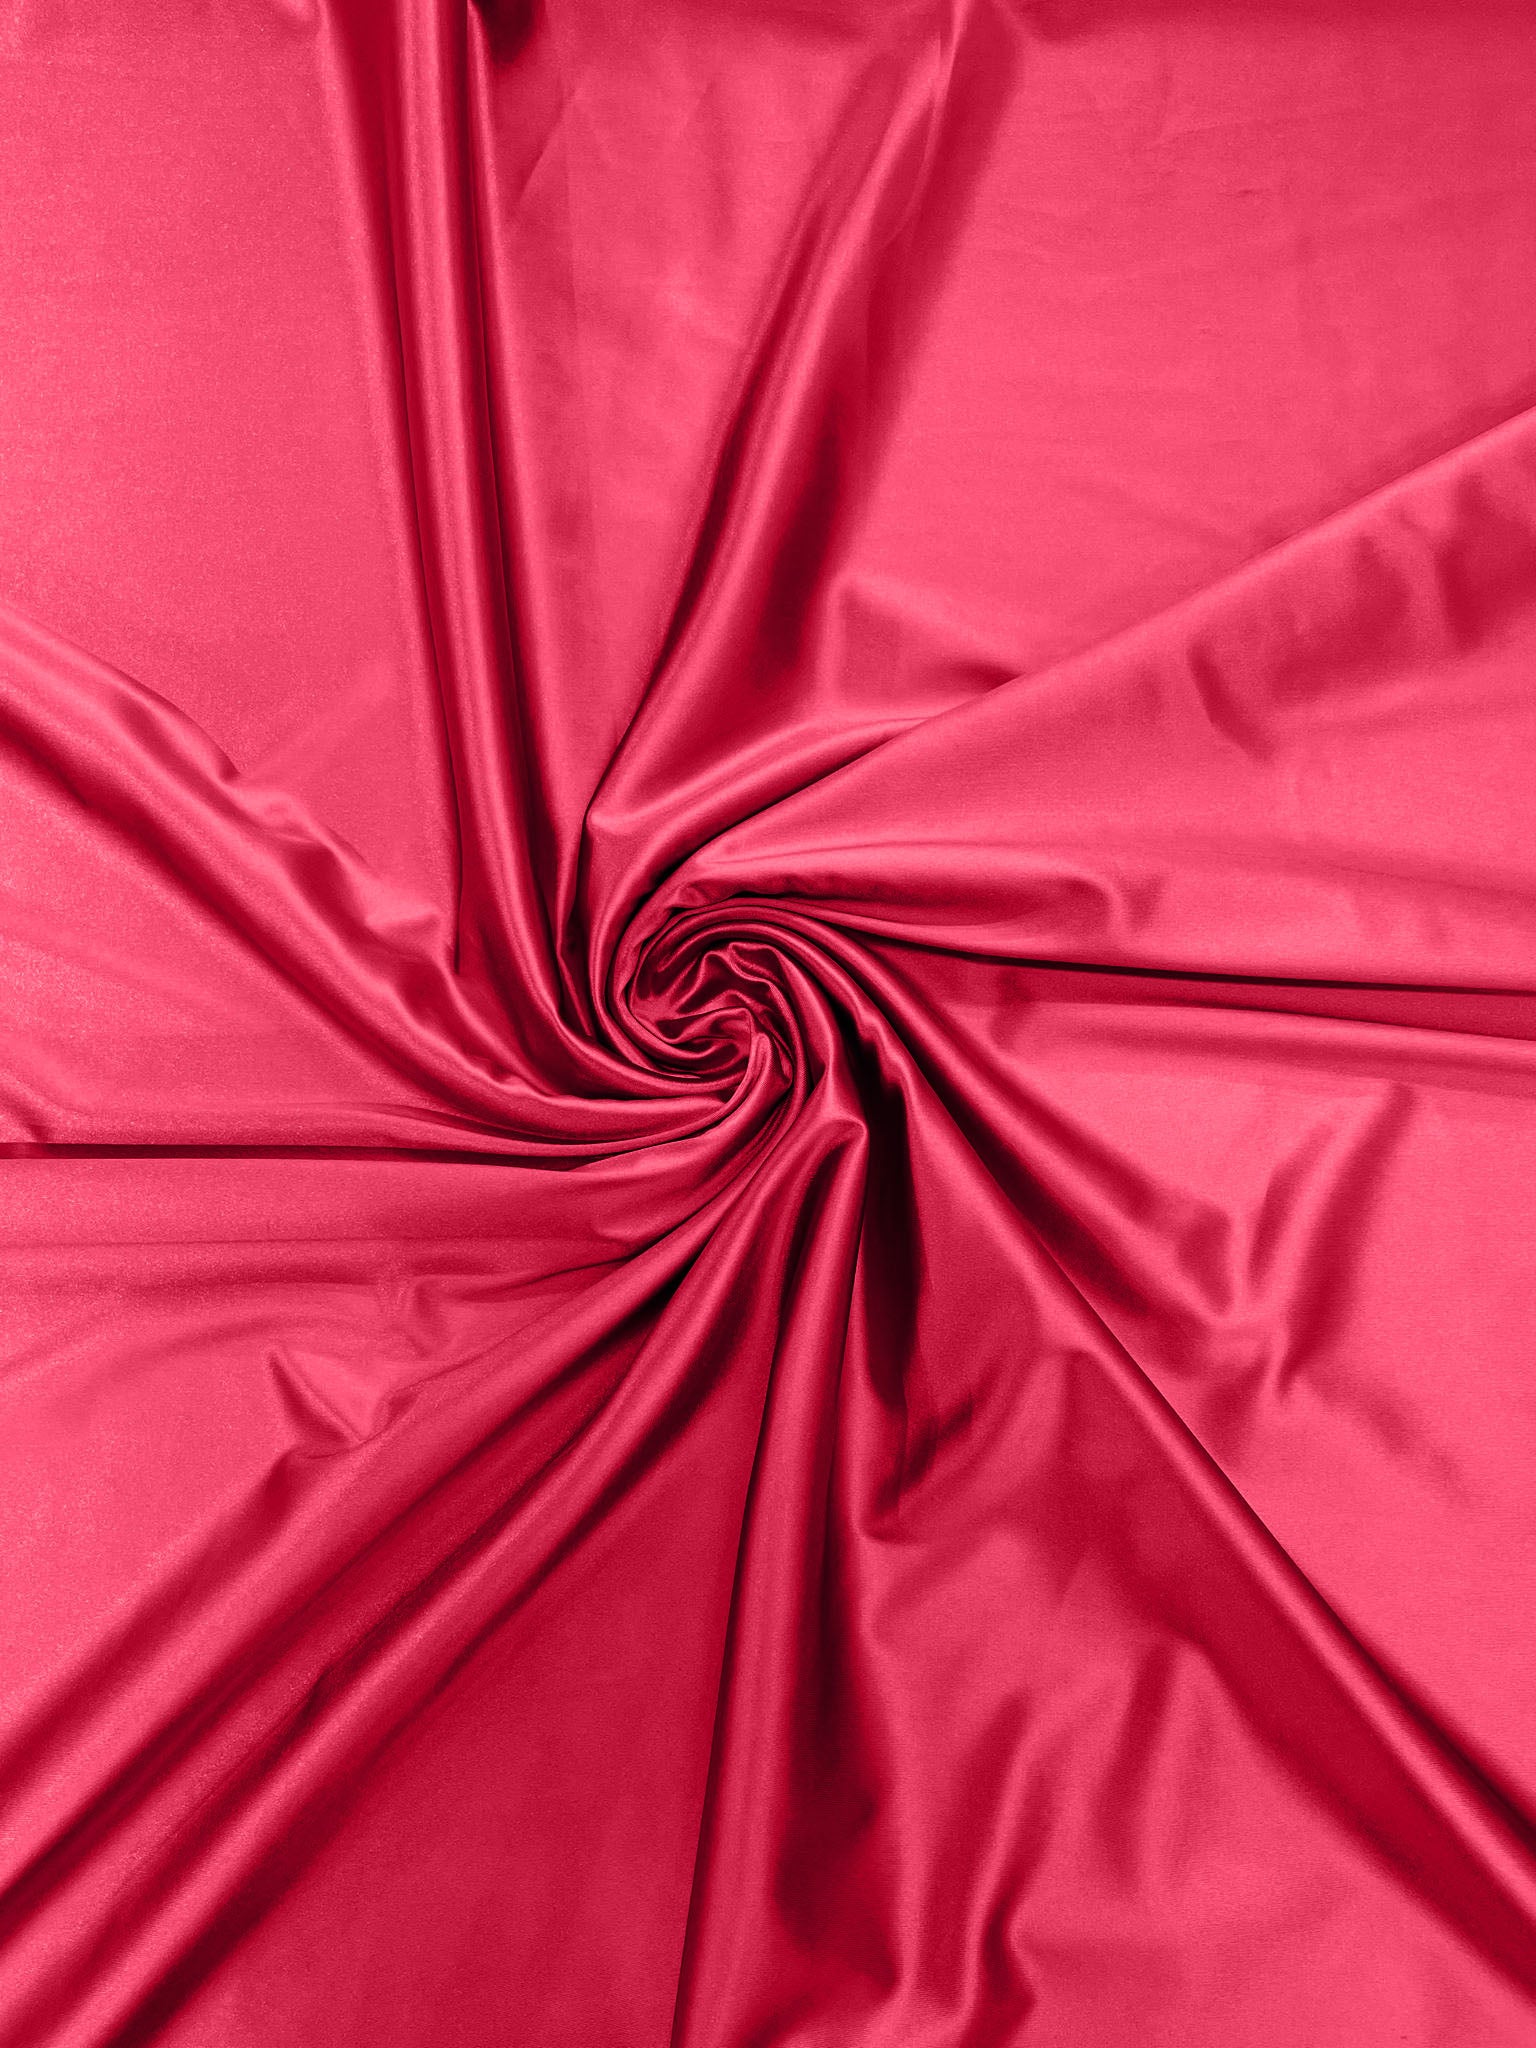 Neon Pink Heavy Shiny Satin Stretch Spandex Fabric/58 Inches Wide/Prom/Wedding/Cosplays.